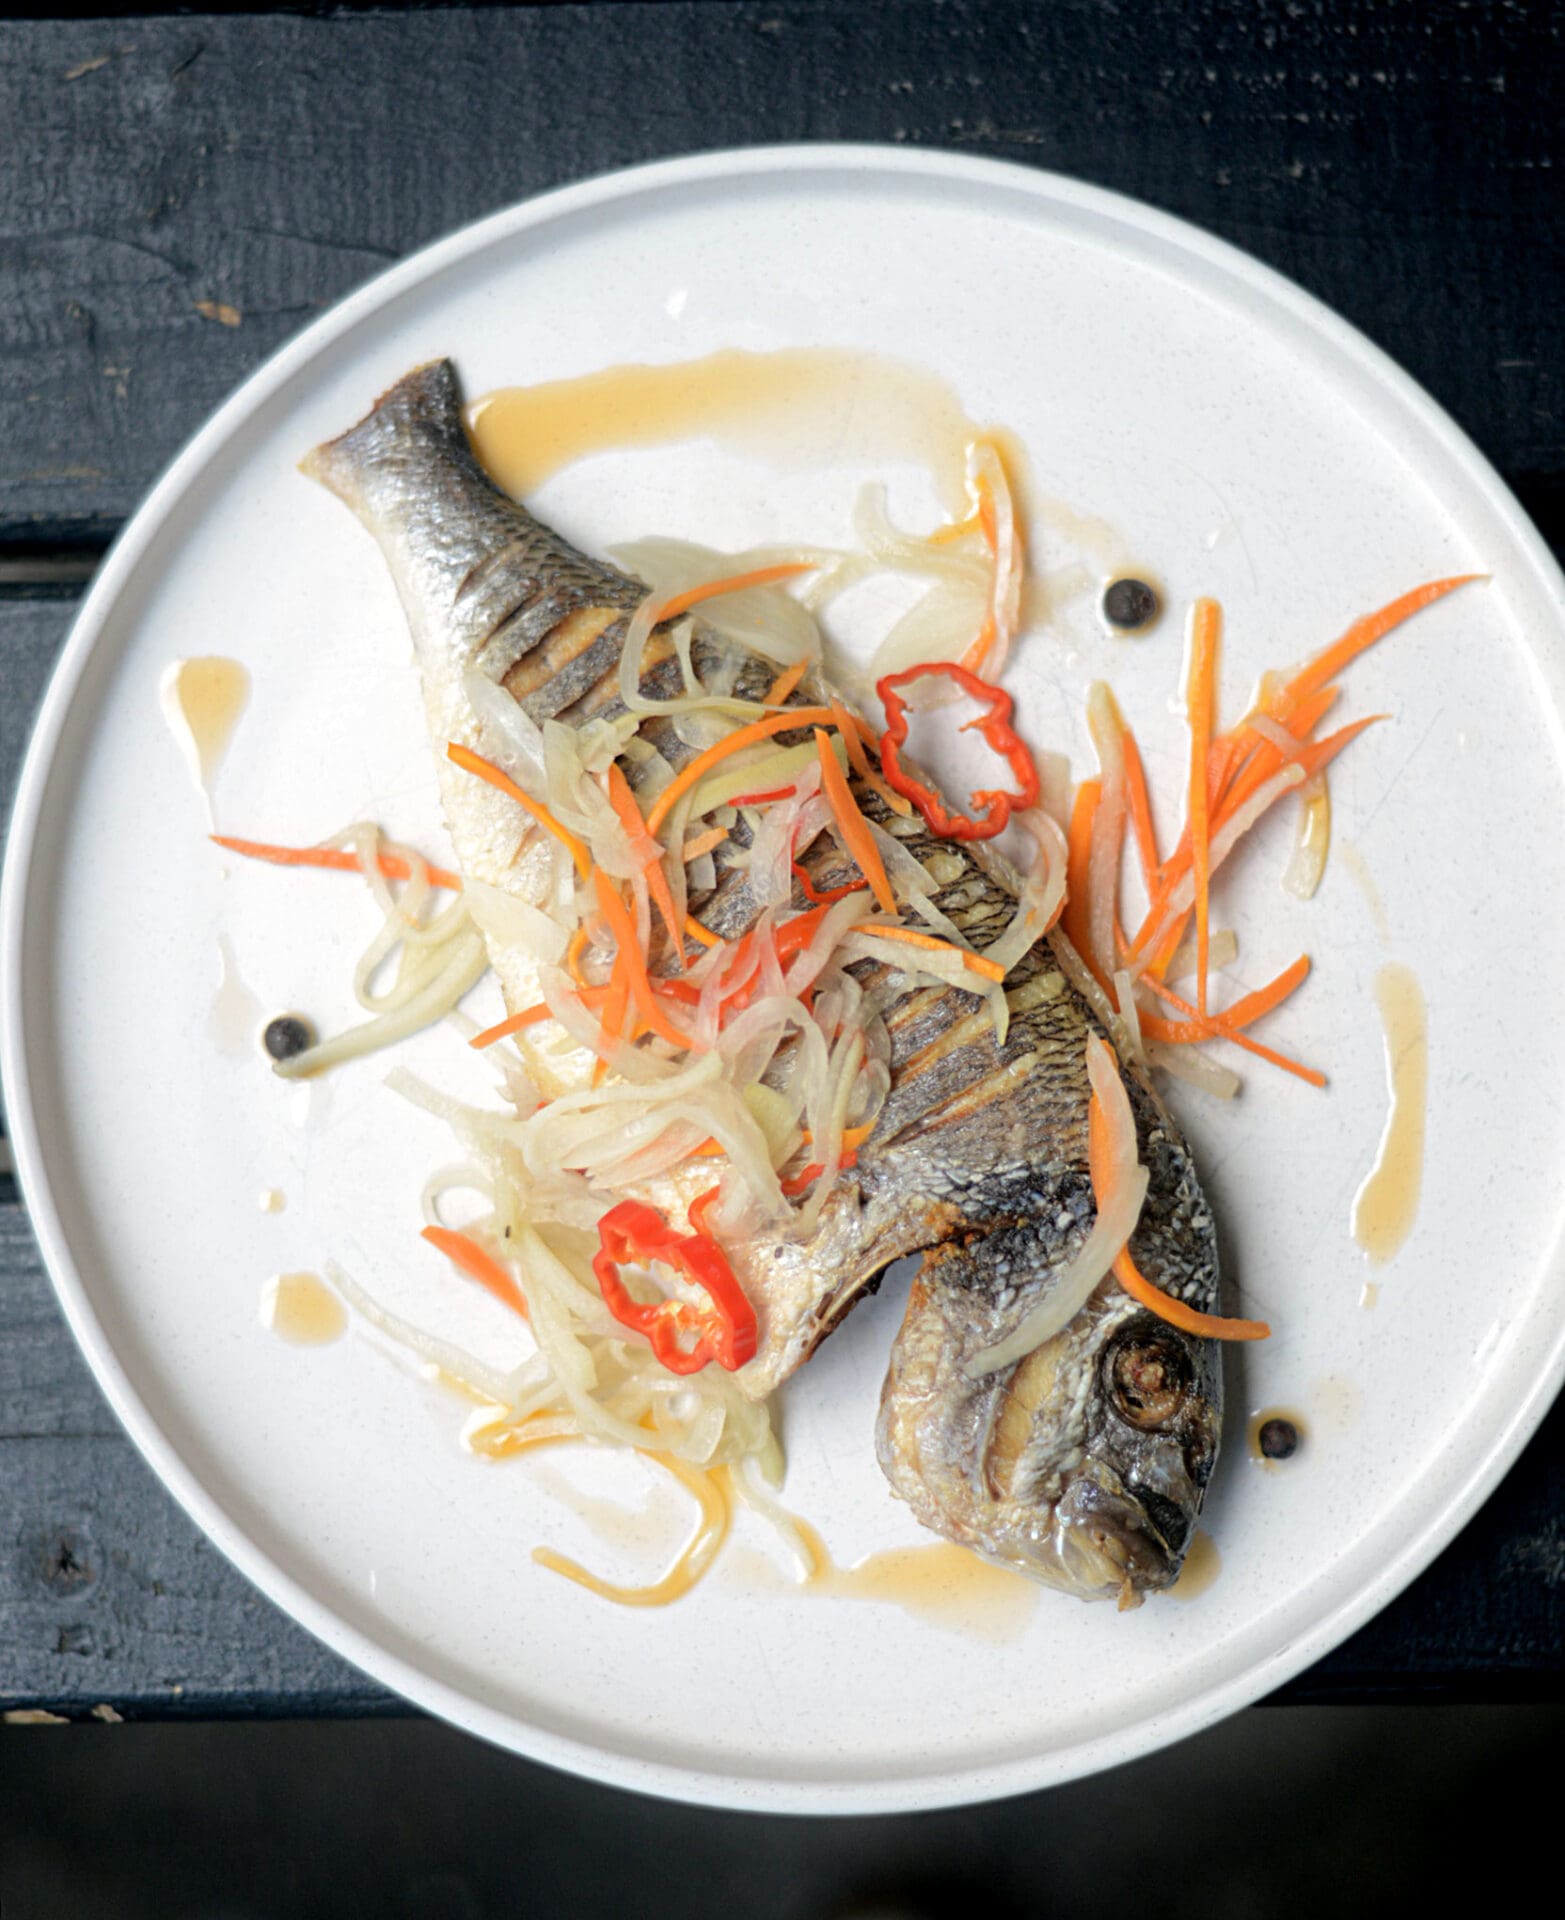 London's Caribbean community | A grilled fish lying on its side on a round white plate, scattered with thinly sliced chopping vegetables like carrots and chillies